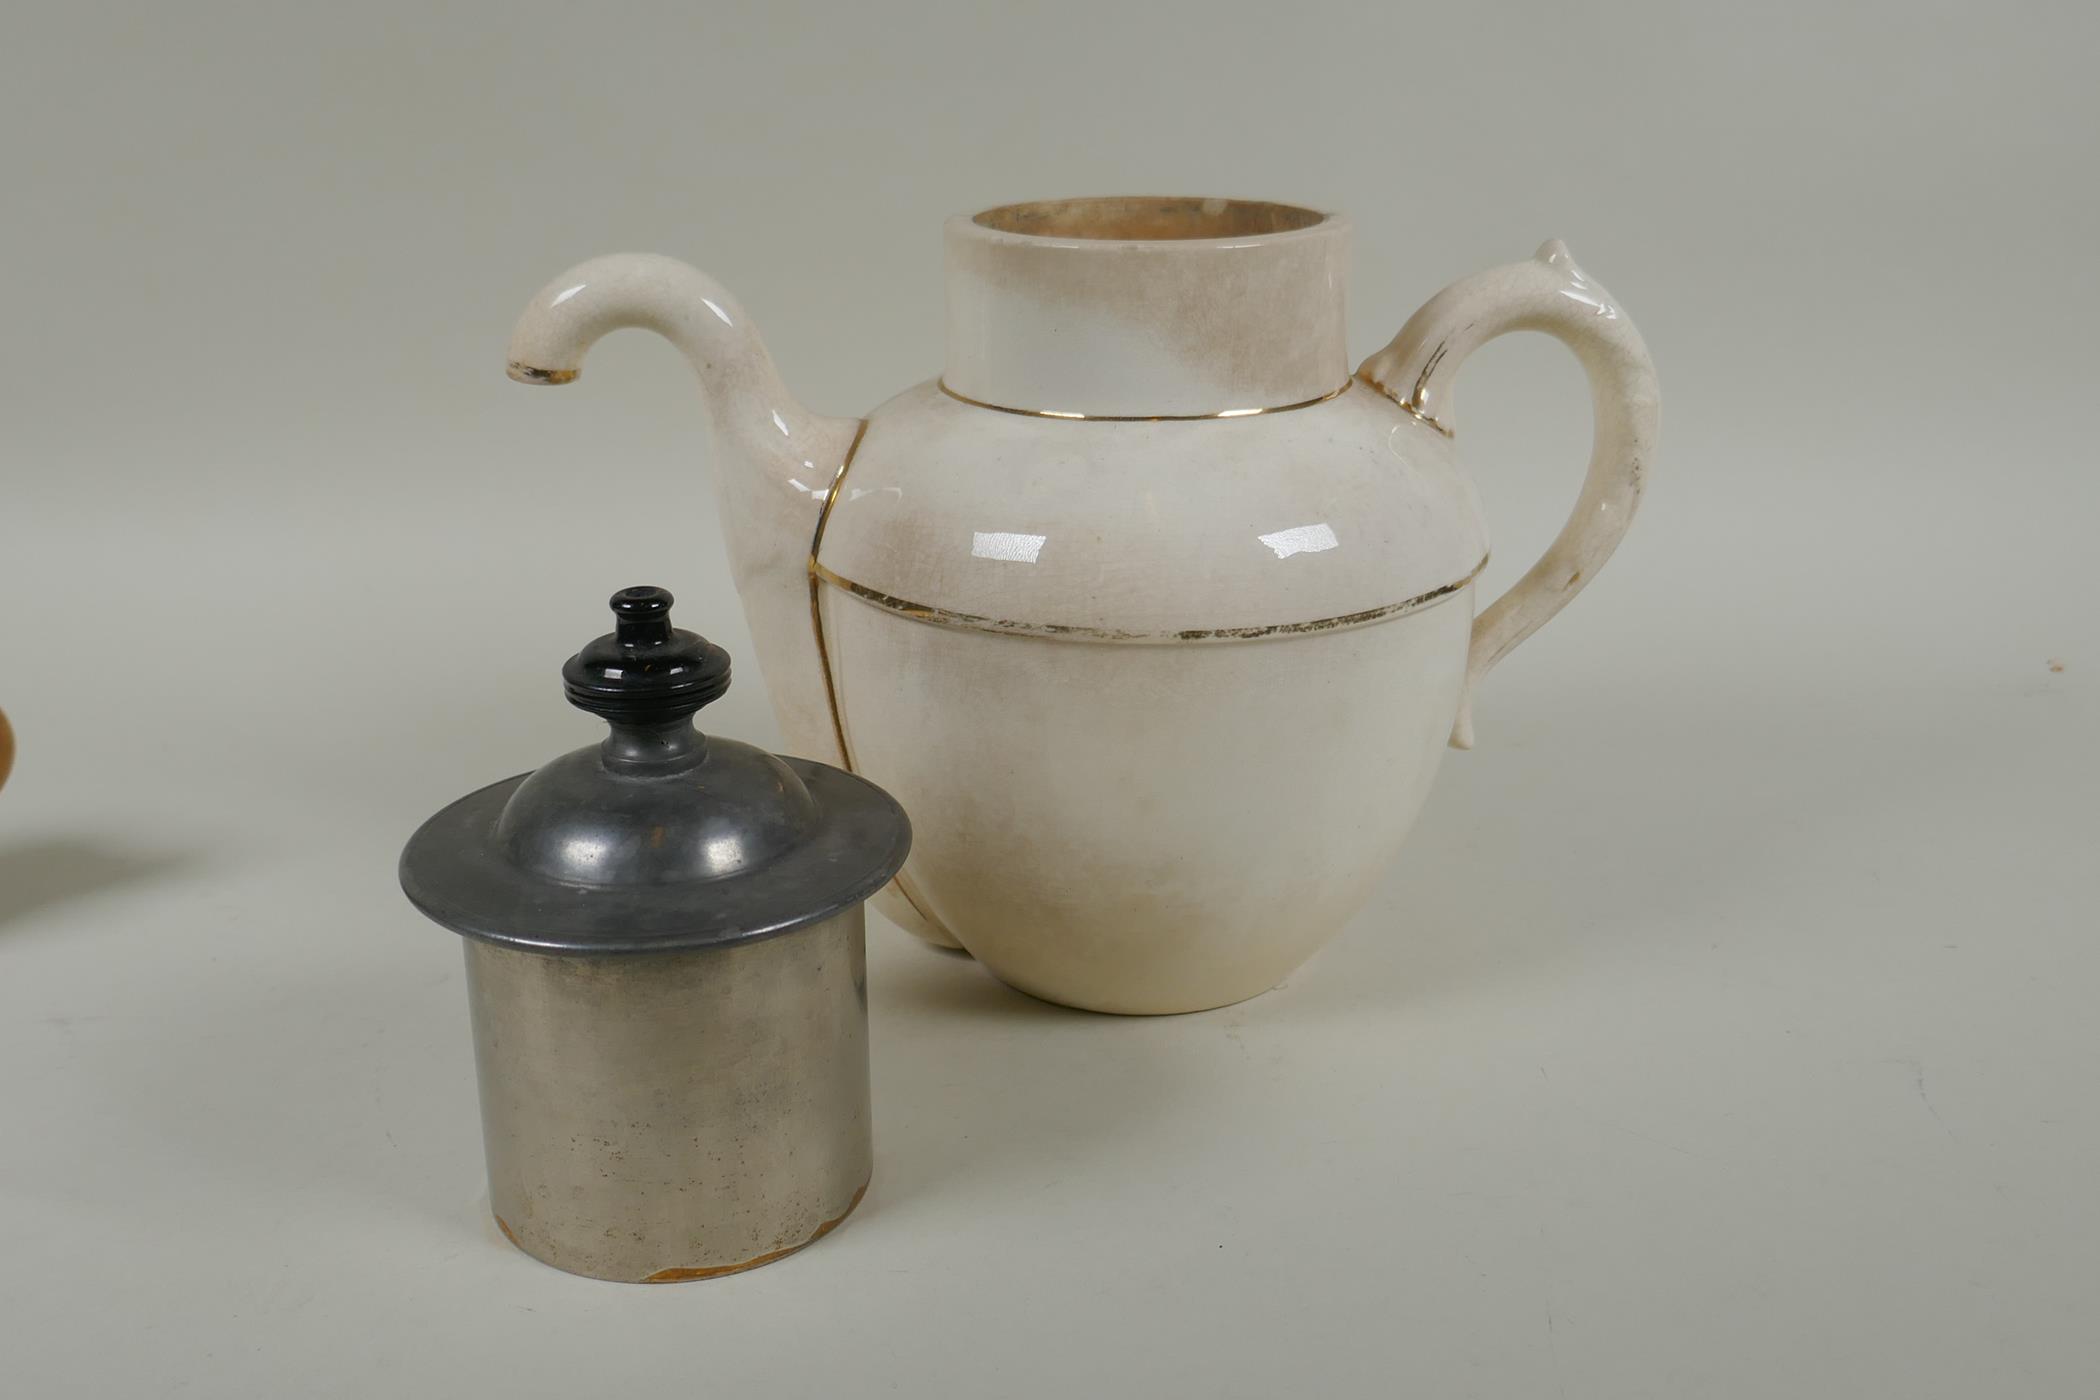 A C19th Burslem Royal patent self pouring teapot, an early stoneware mug with transfer decoration of - Image 5 of 9